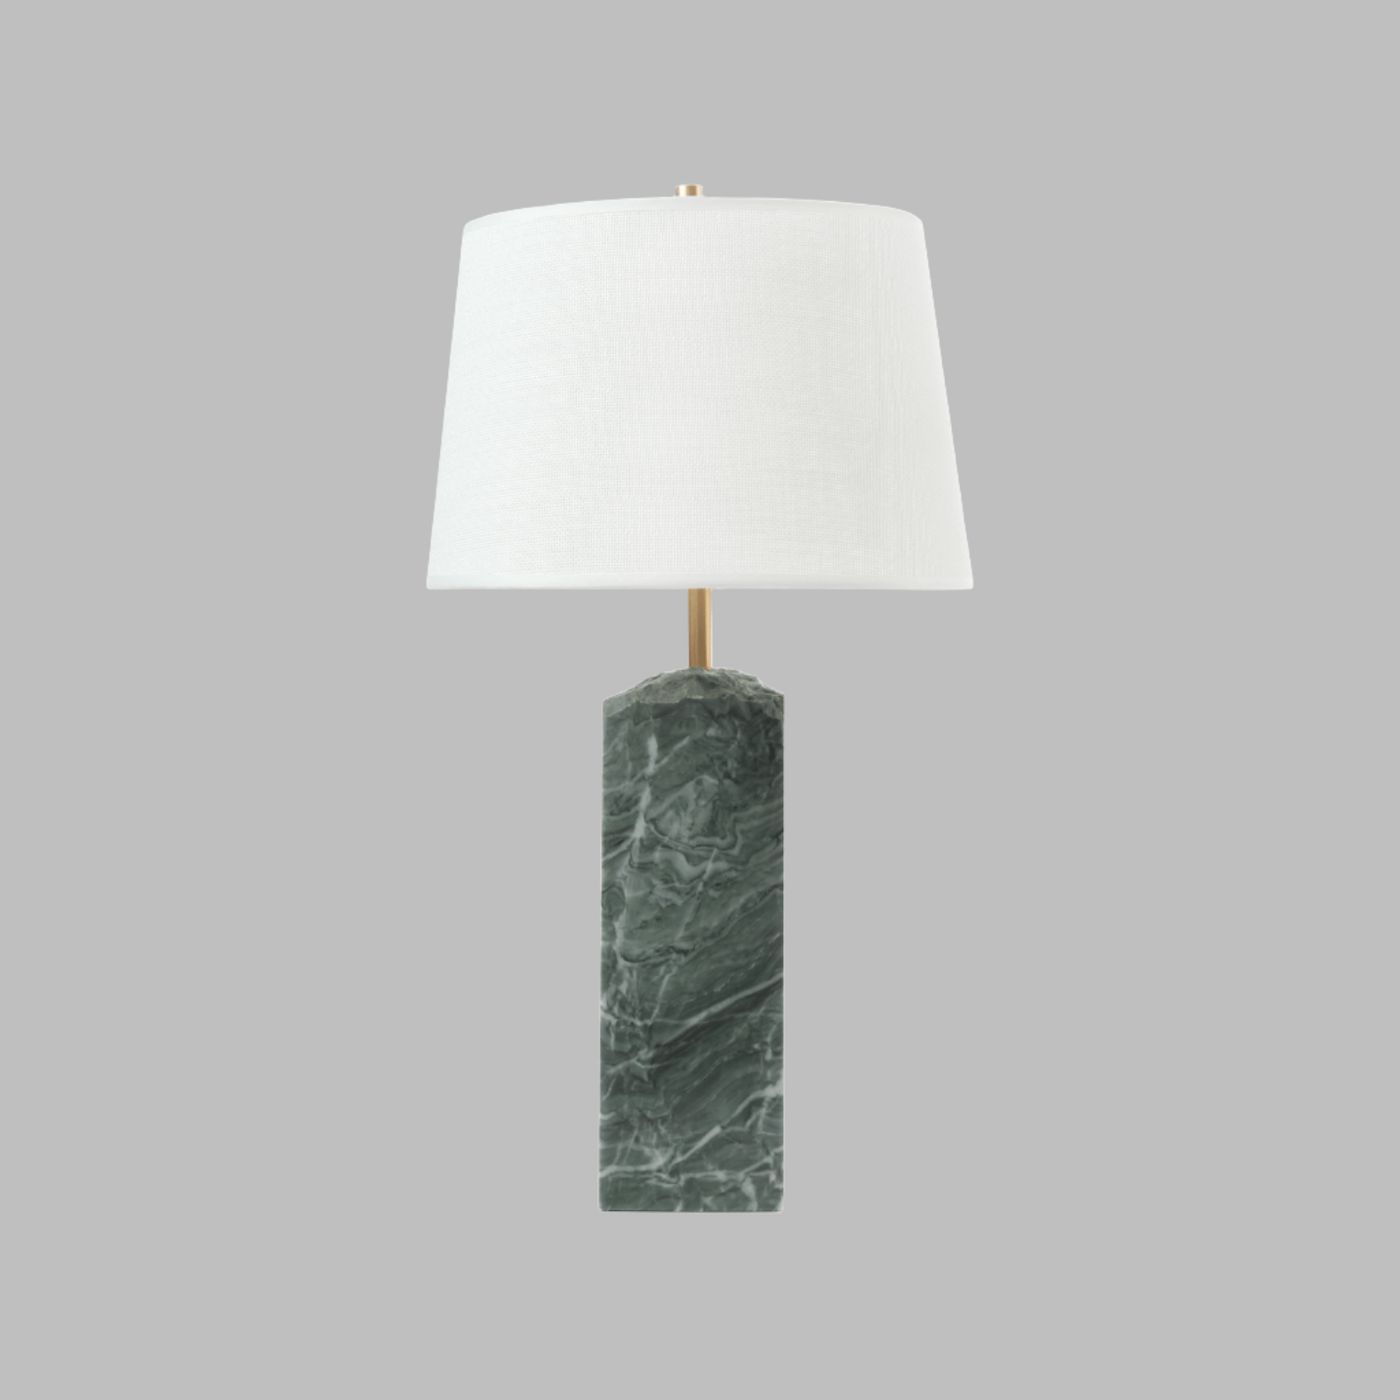 Michelangelo Marble Table Lamp, Green Table & Bedside Lamps sazy.com